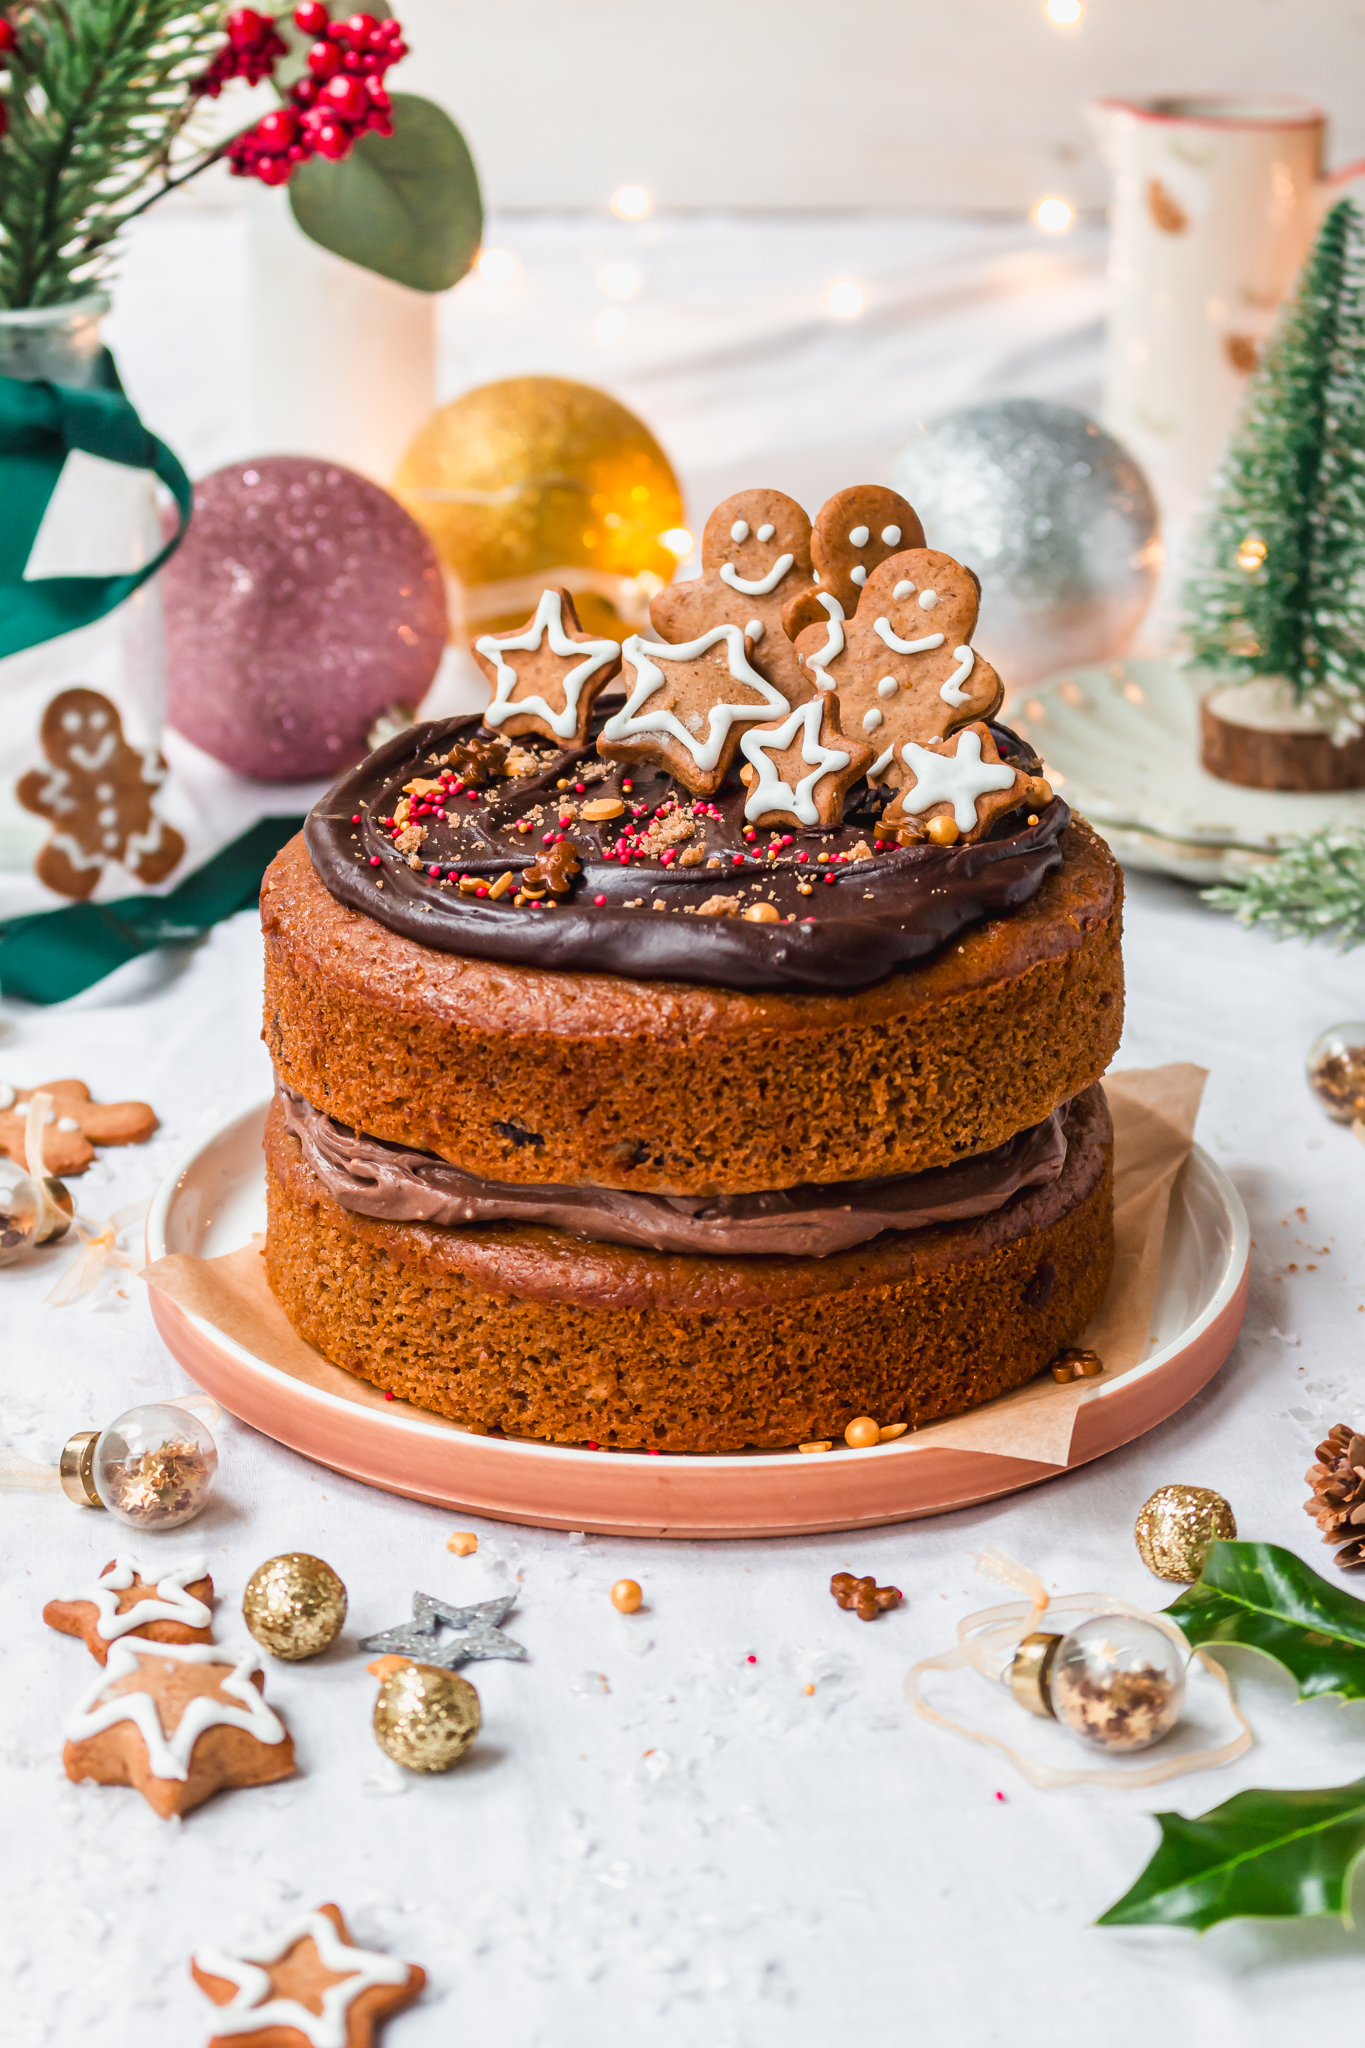 A Chocolate Chip Gingerbread Layer Cake